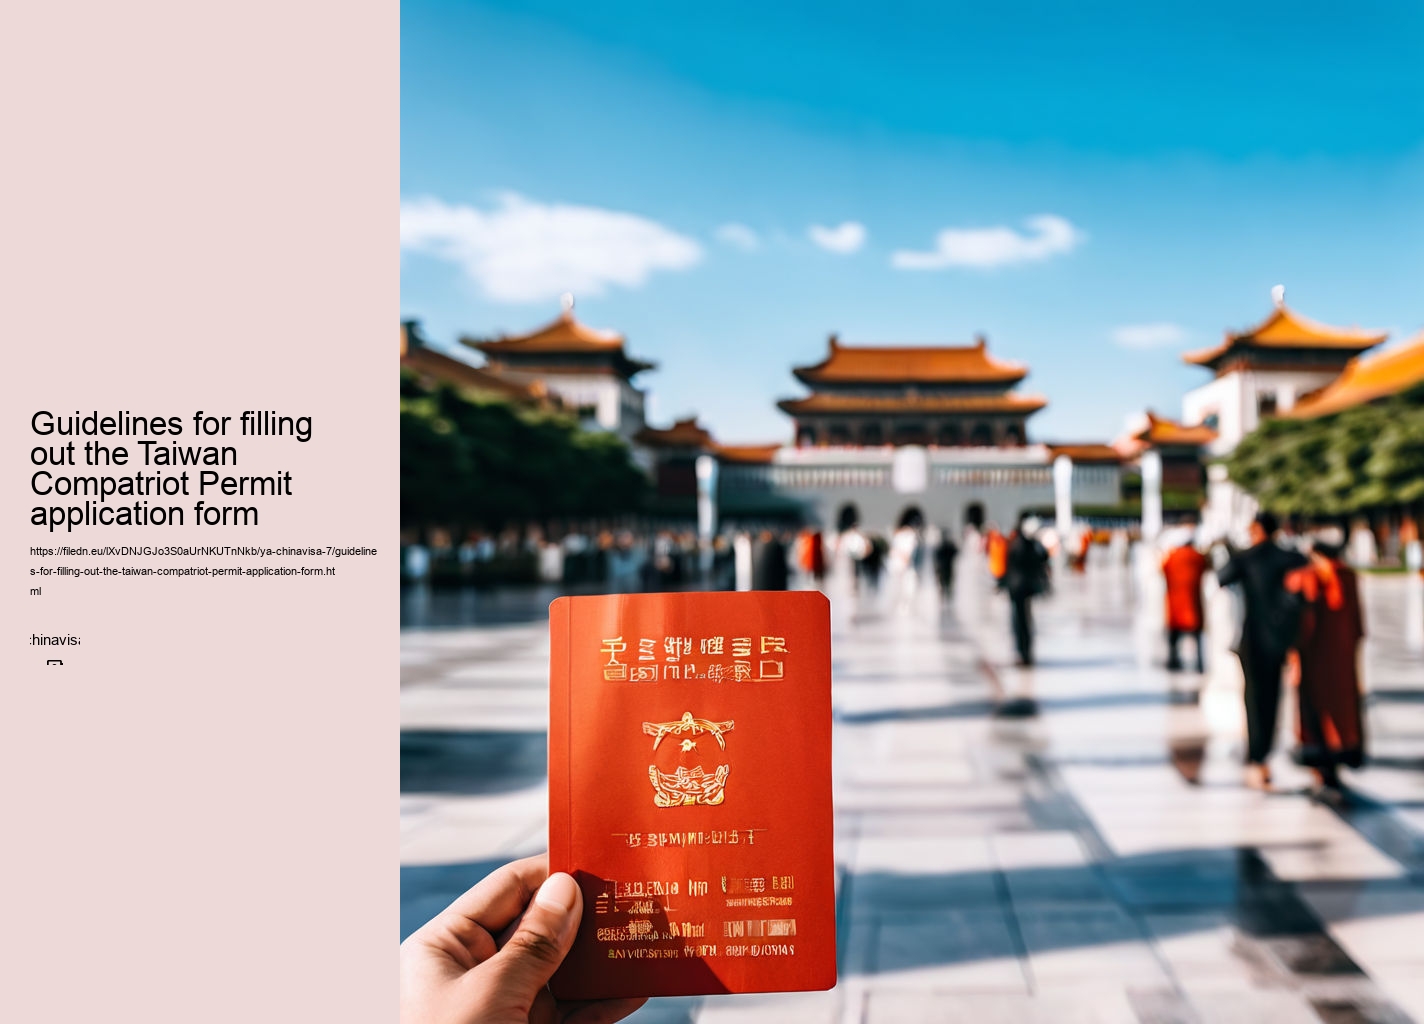 Guidelines for filling out the Taiwan Compatriot Permit application form